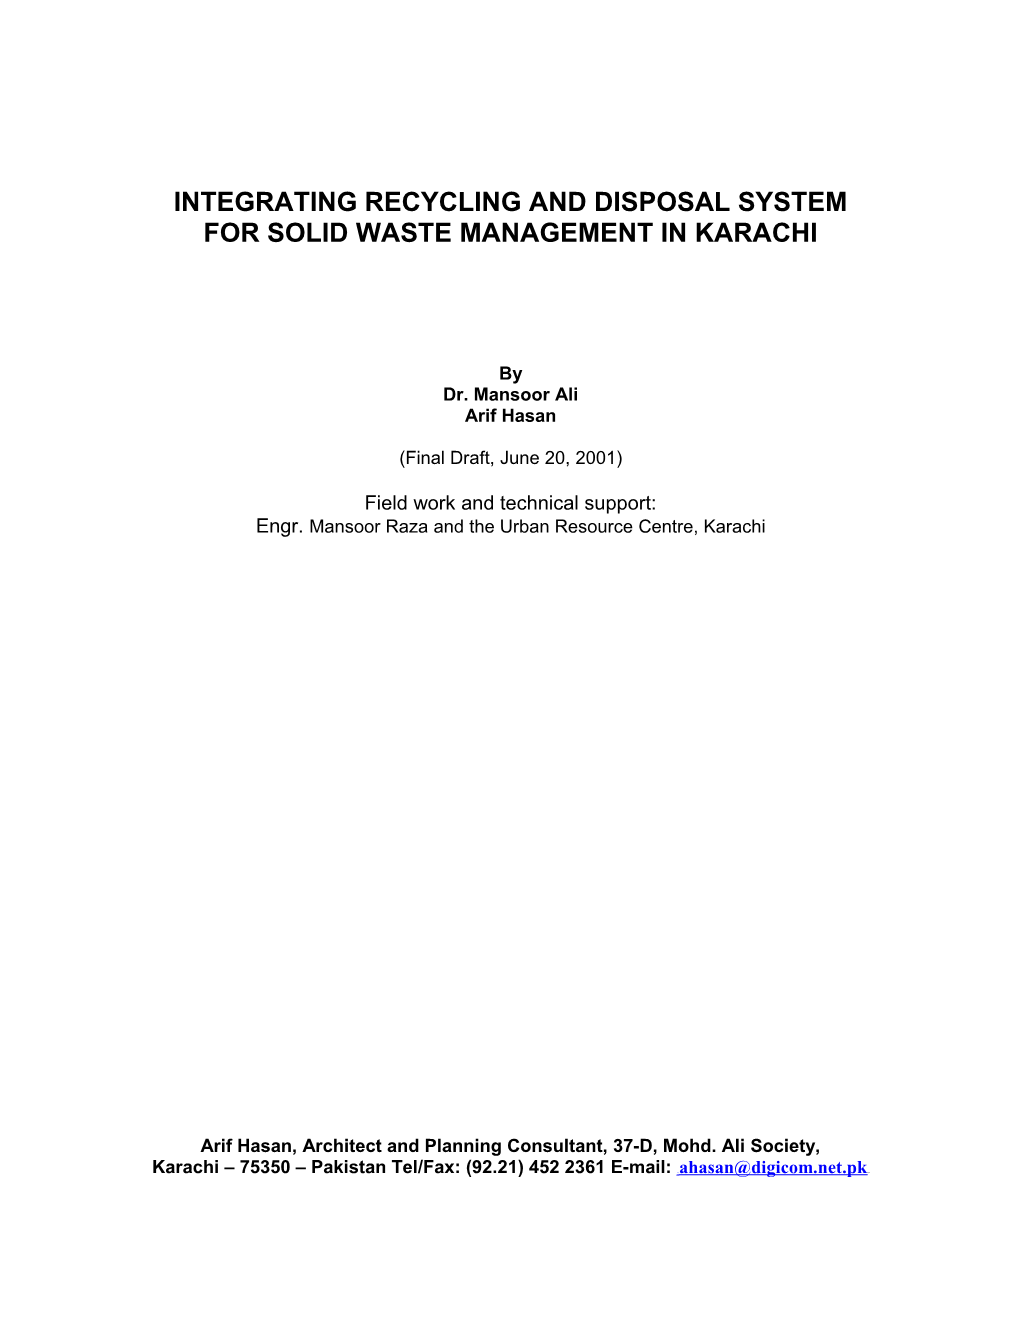 Integrating Recycling and Disposal System for Solid Waste Management in Karachi